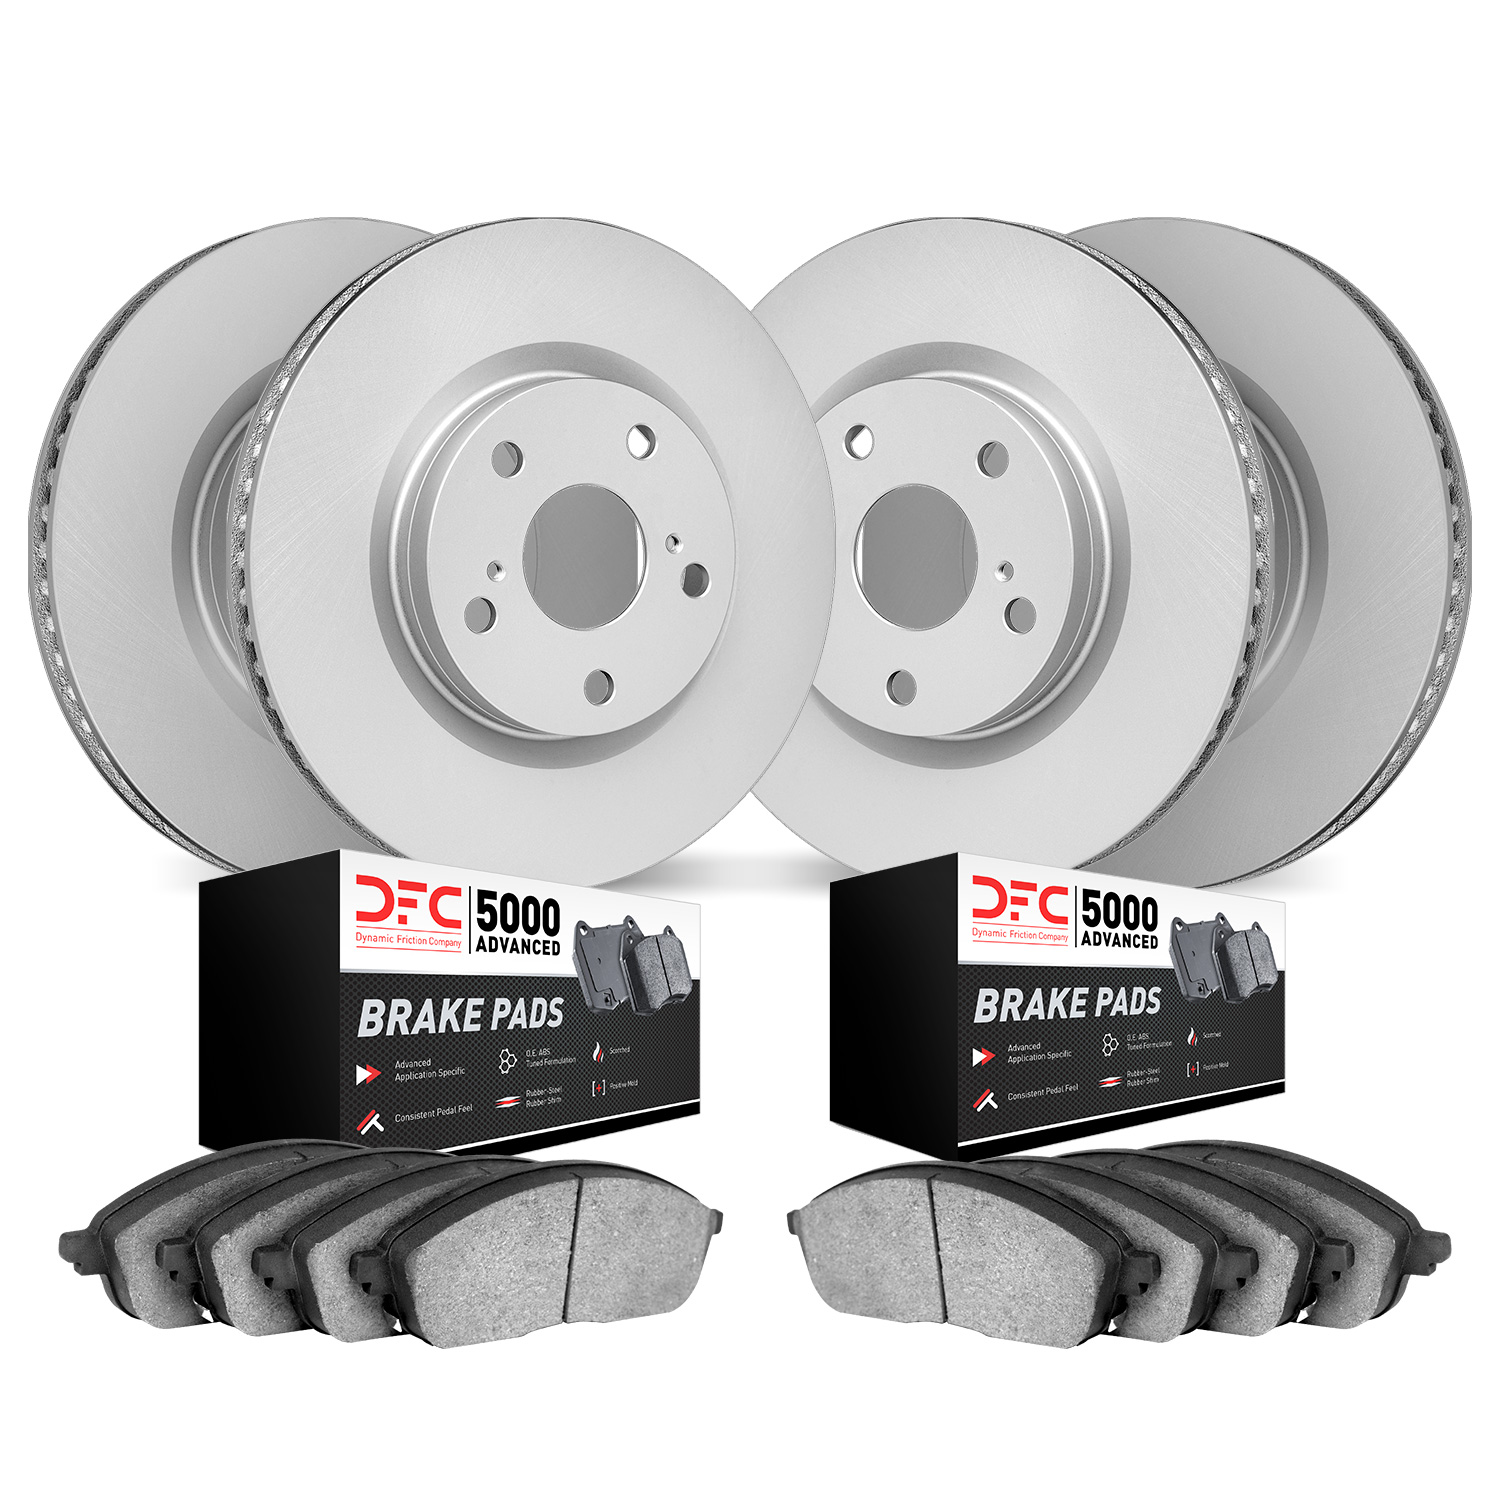 4504-63067 Geospec Brake Rotors w/5000 Advanced Brake Pads Kit, 2003-2006 Mercedes-Benz, Position: Front and Rear